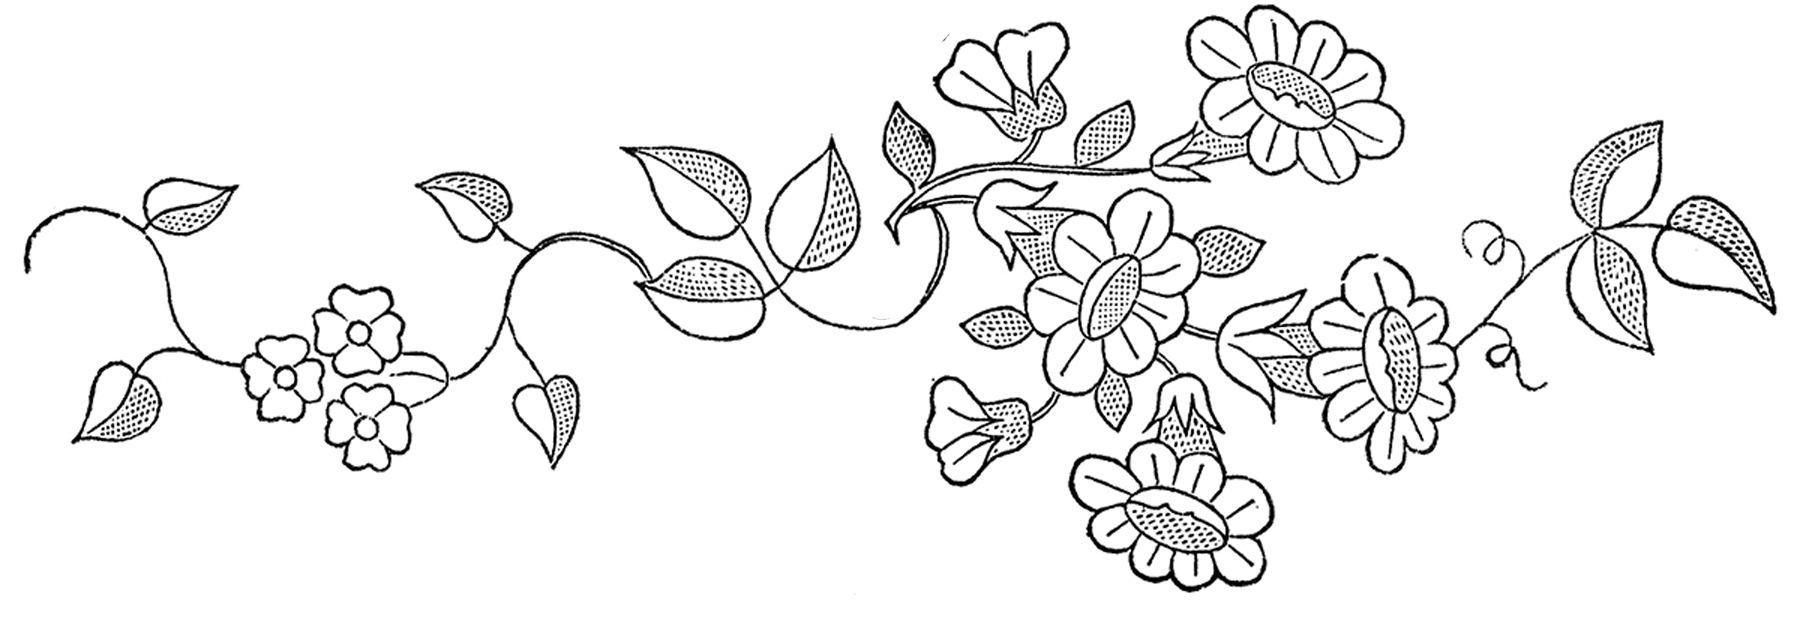 7 Printable Flower Embroidery Patterns! - The Graphics Fairy